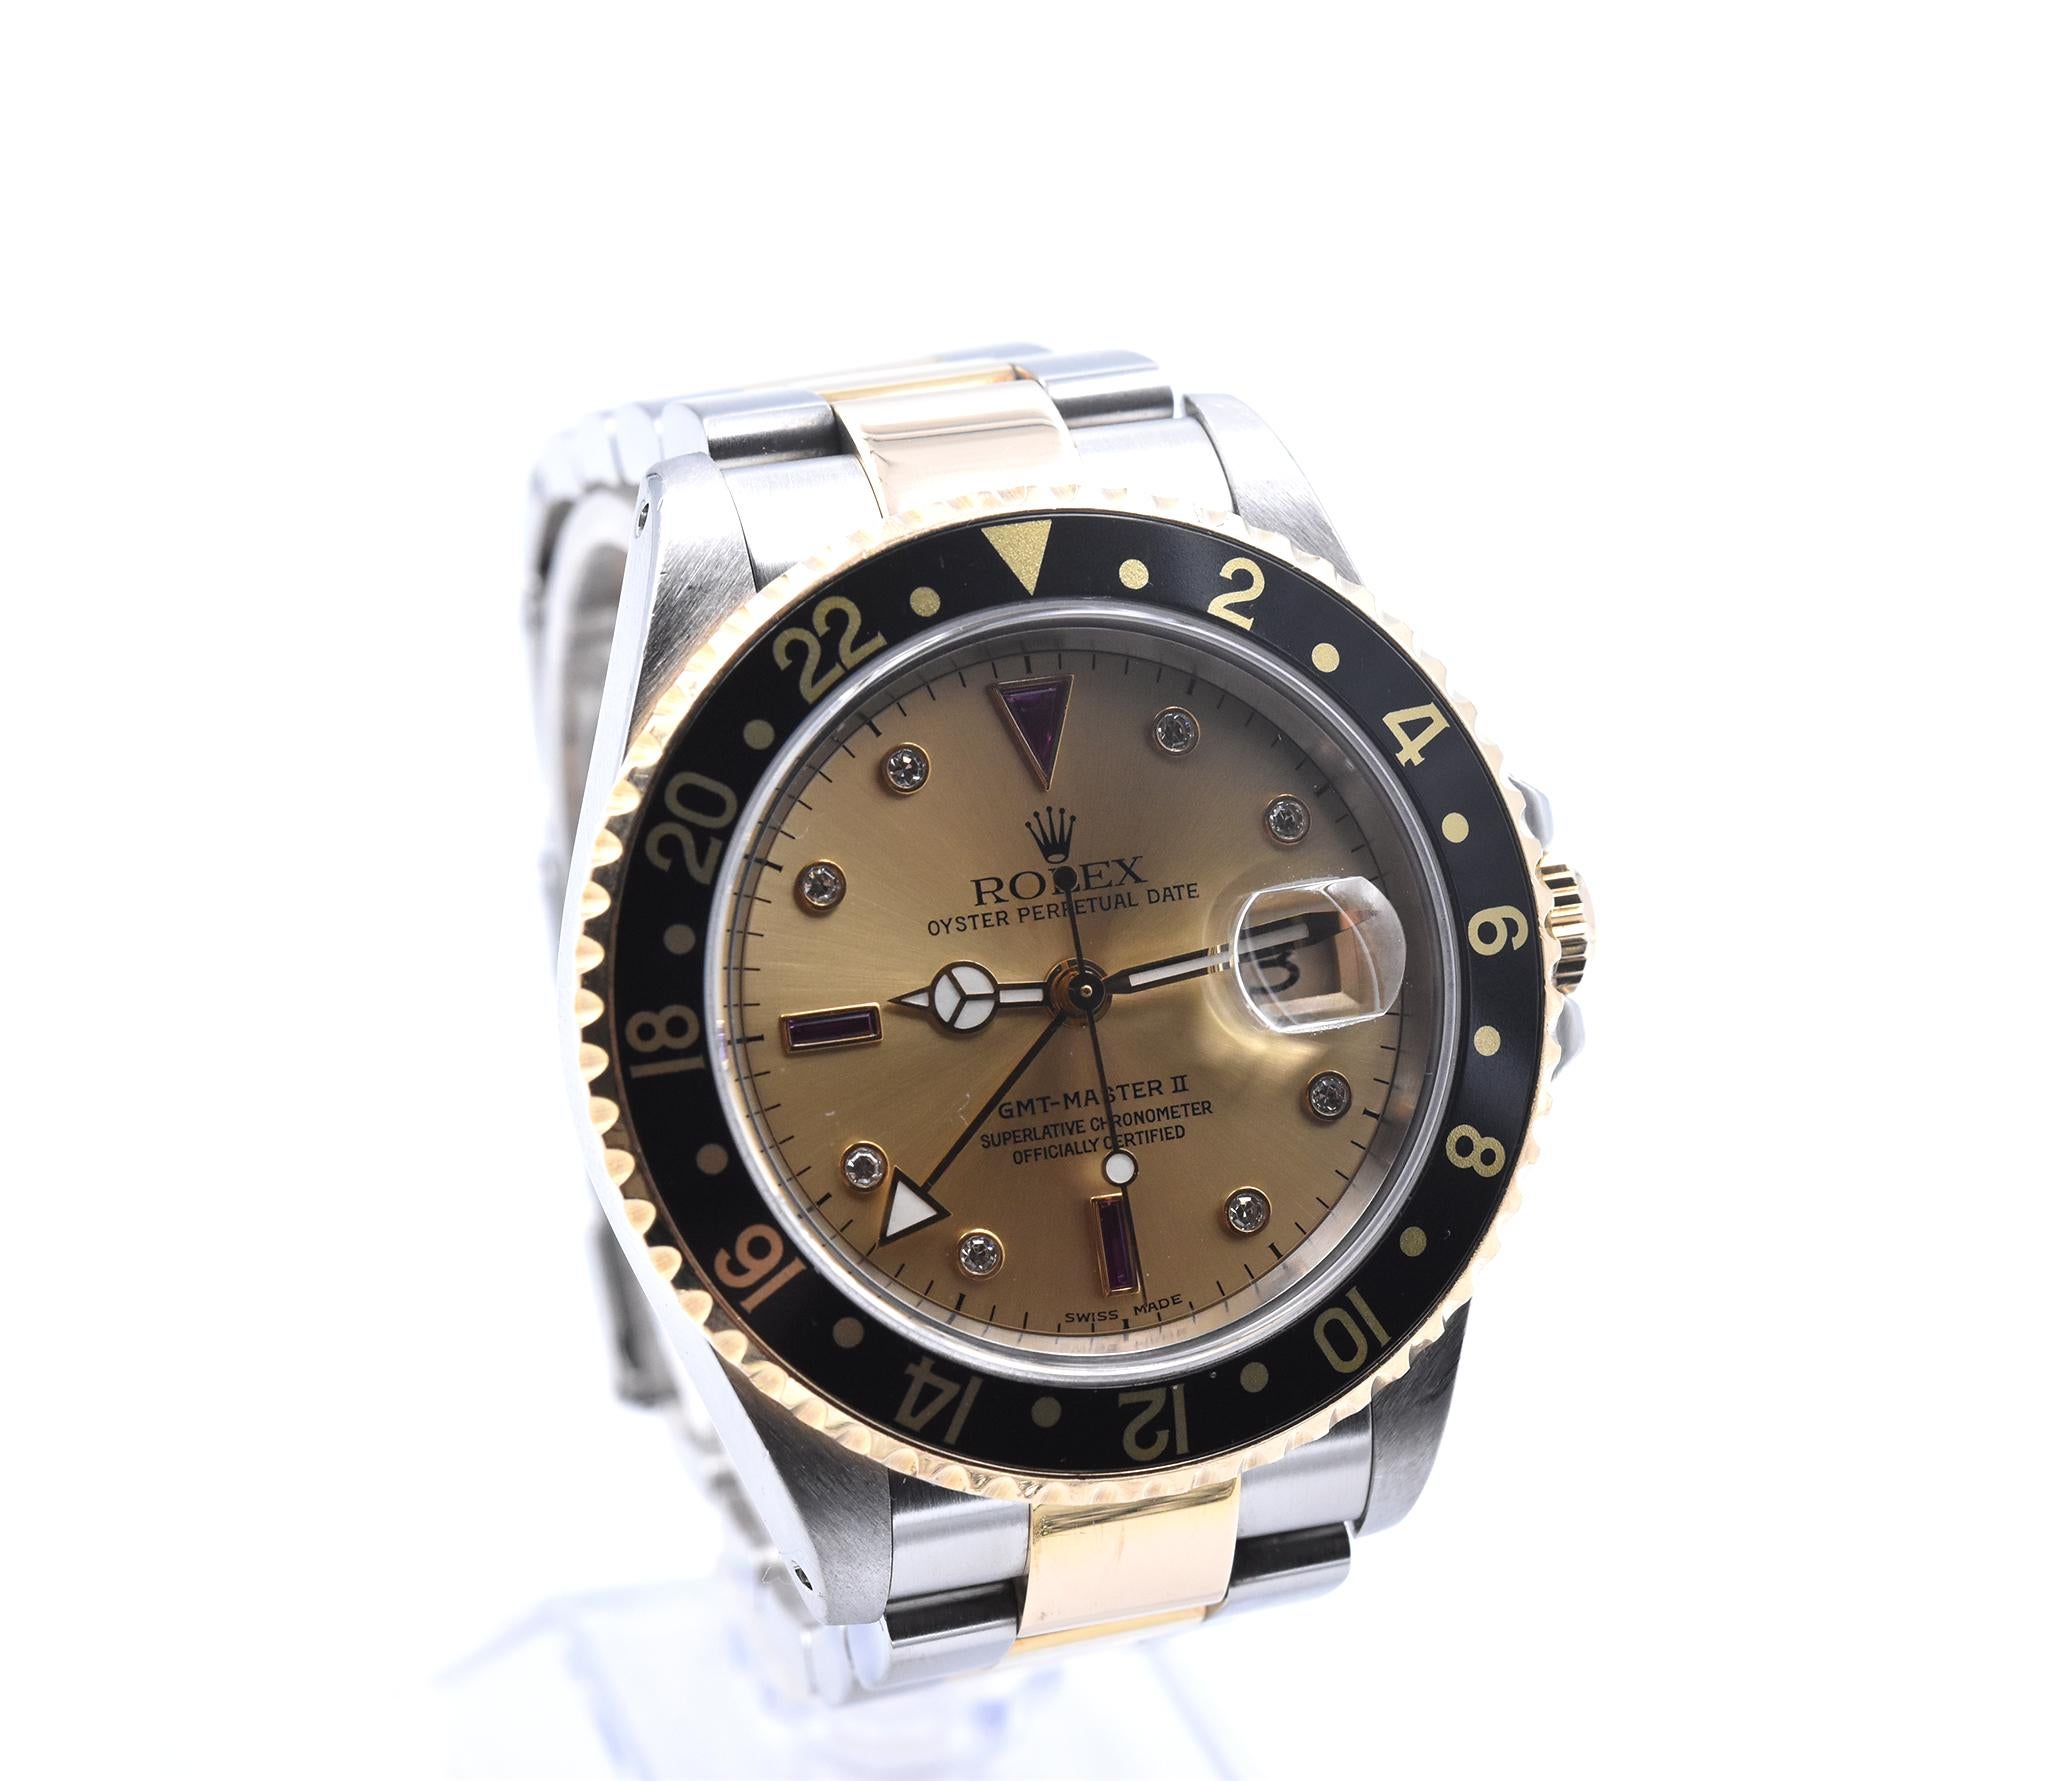 Movement: automatic
Function: hours, minutes, sweep seconds, date, GMT function
Case: 40mm stainless steel case, sapphire crystal, bidirectional black bezel with 18k yellow gold
Band: 18k yellow gold and stainless steel bracelet with steel